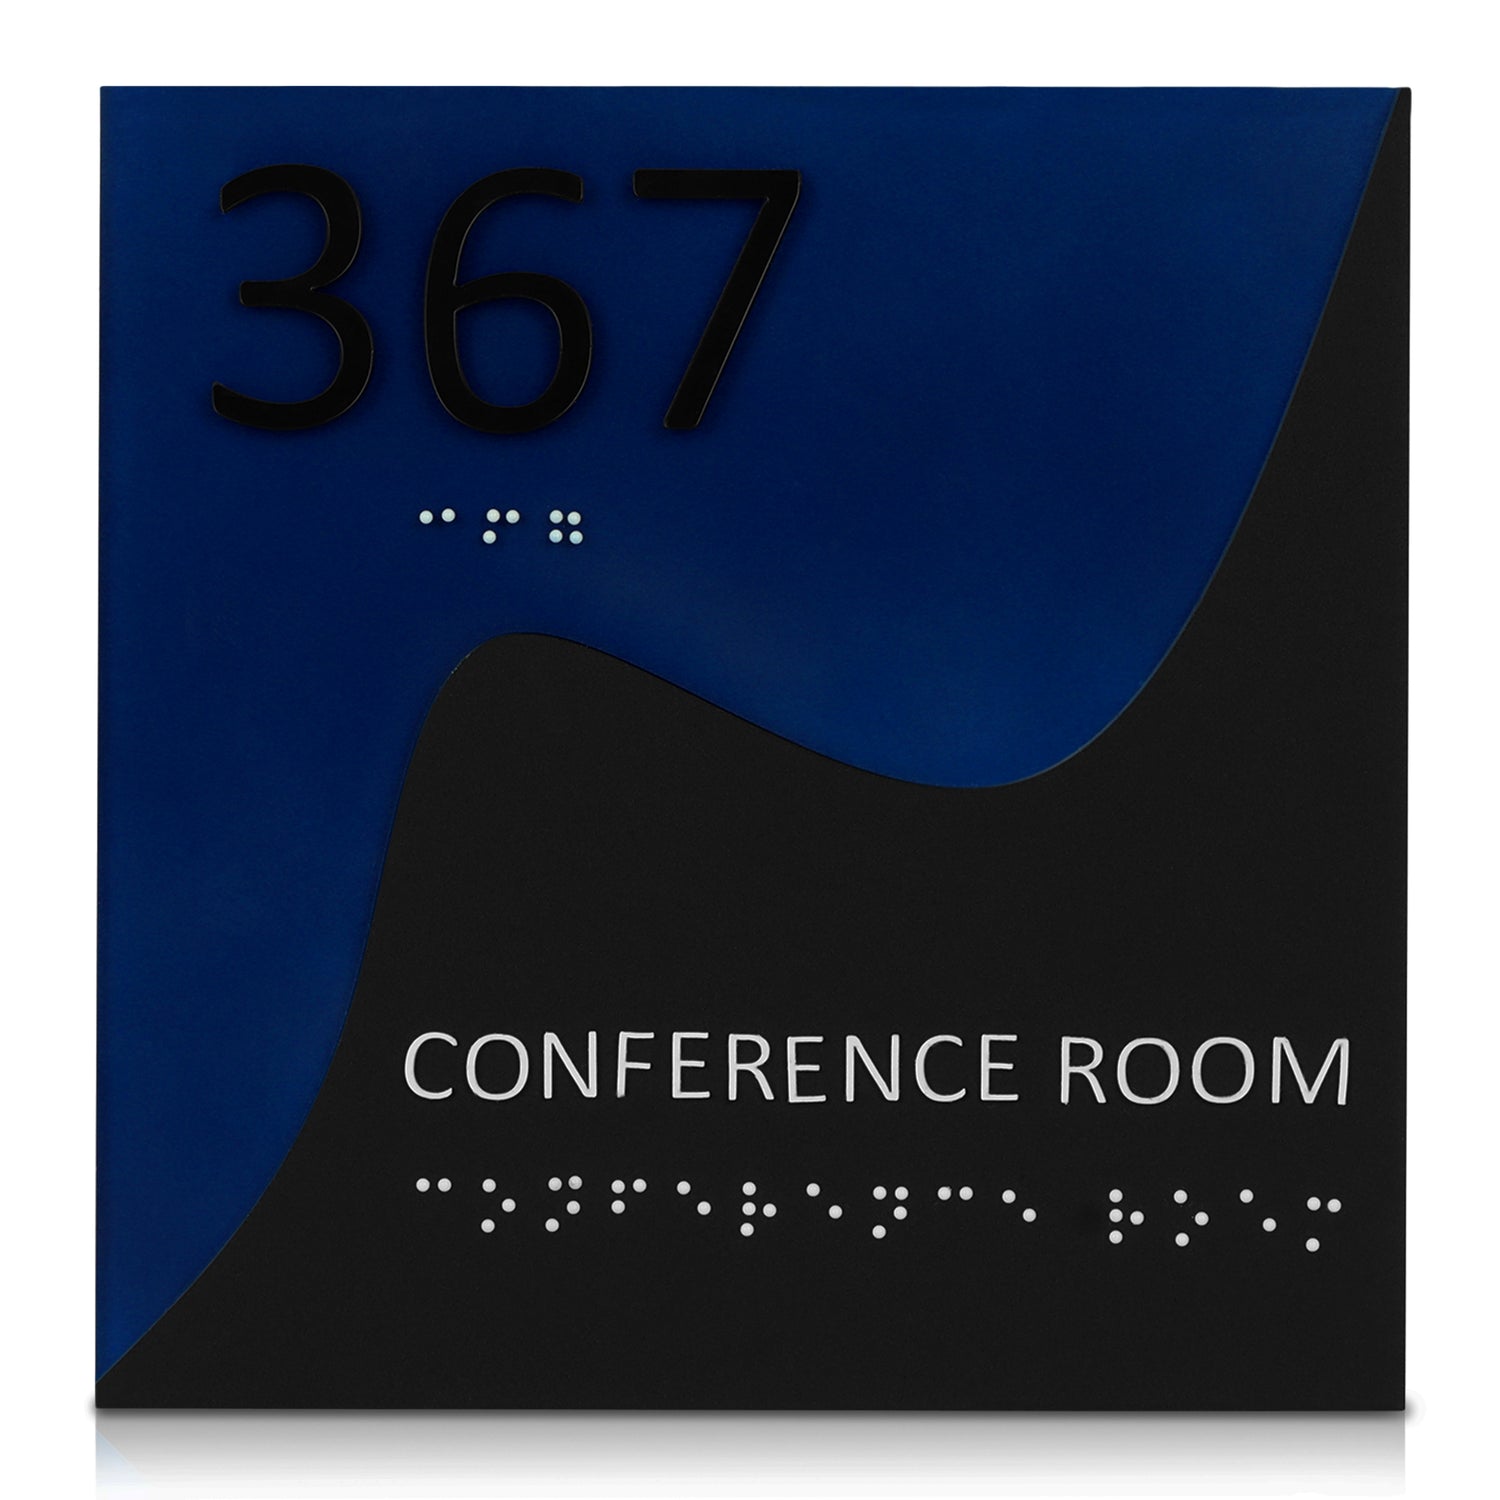 367 Conference Room Signage